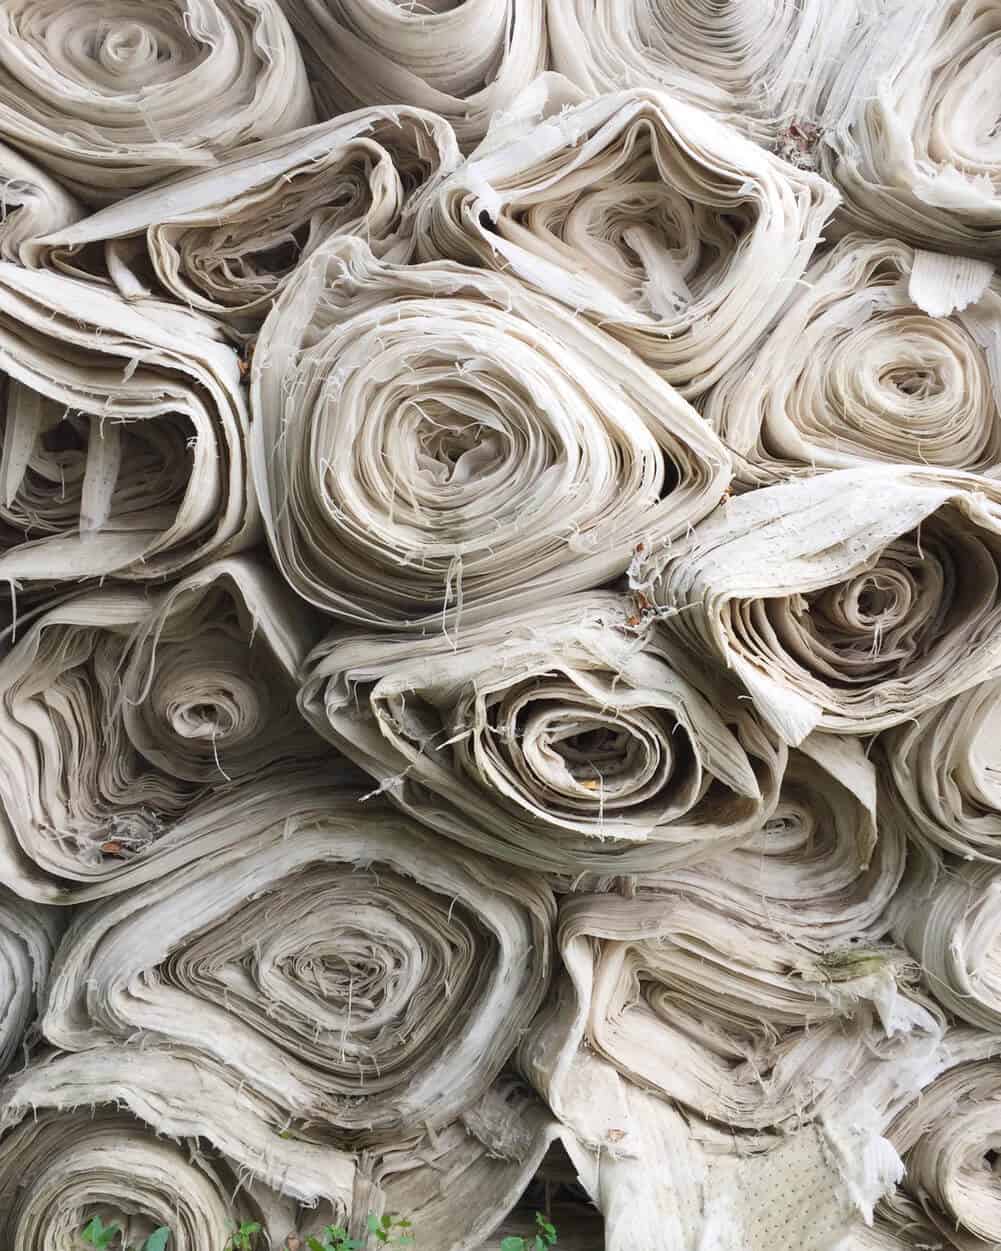 Large rolls of white textile fabric for manufacturing